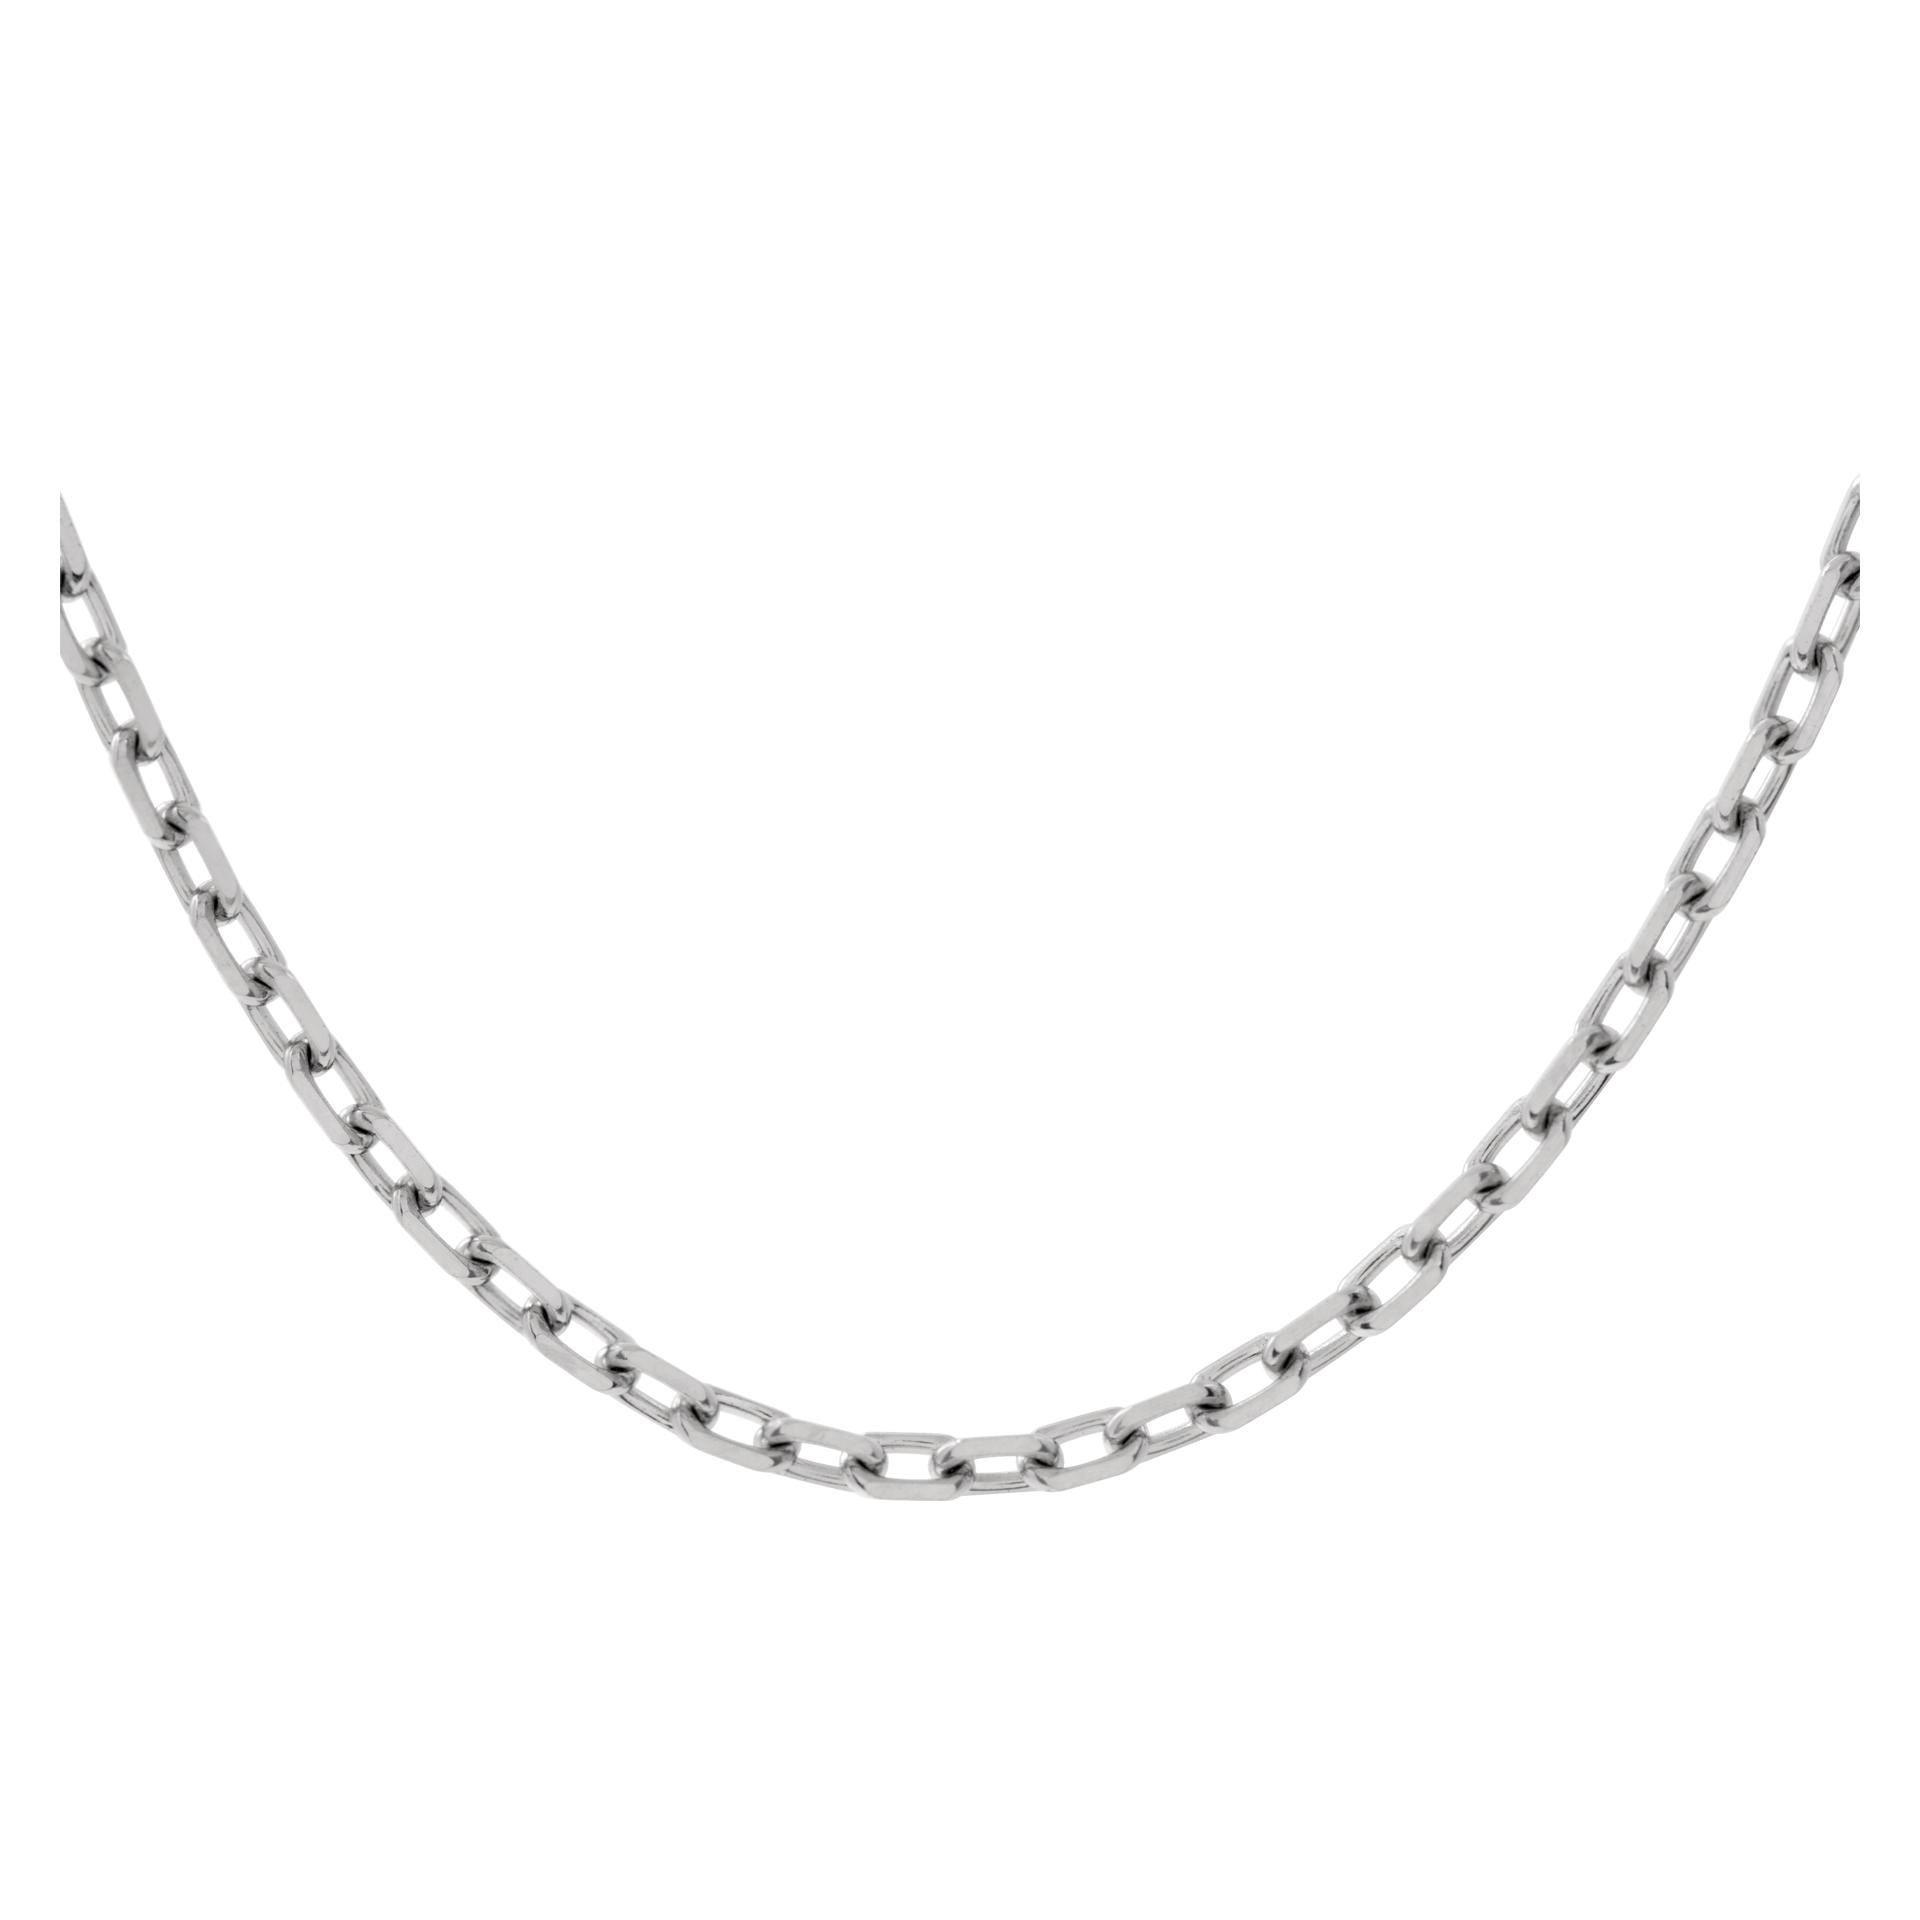 Thin link 1mm width chain in 18k white gold. Measures 18 inches long.
